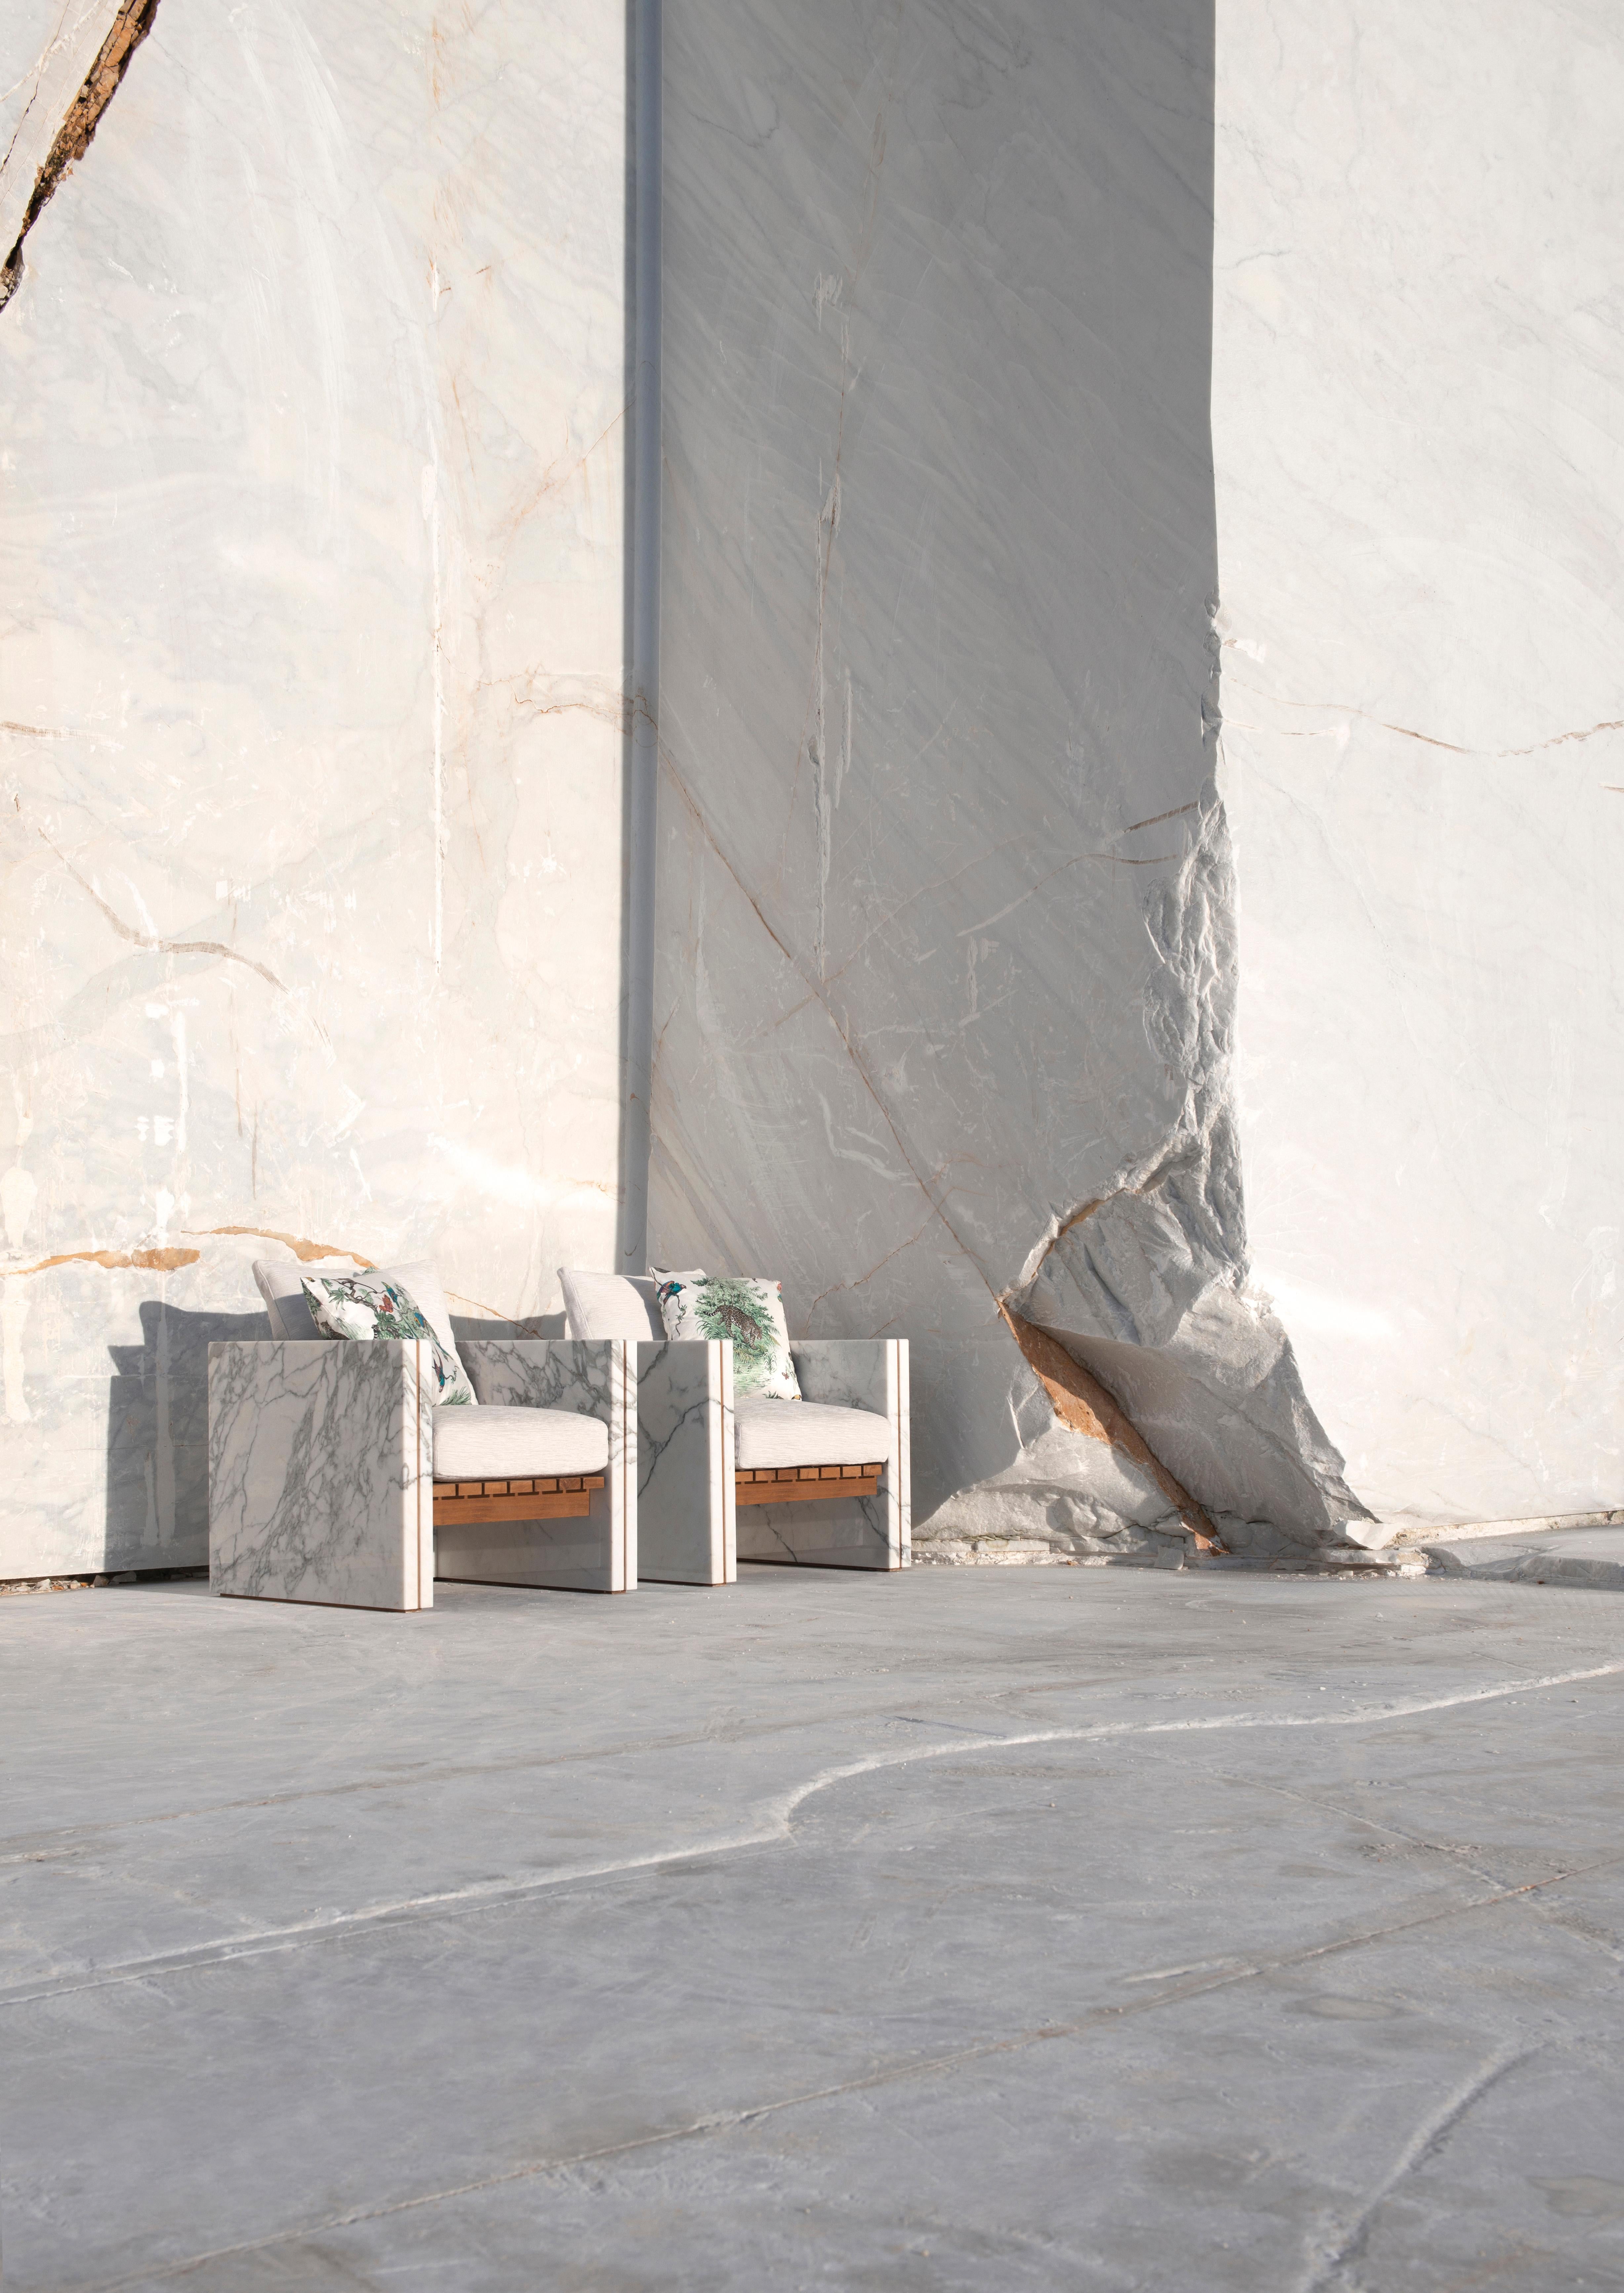 Bettogli Armchair is made in Statuario marble, a rare quality of marble that is extracted from the Bettogli quarries in North Tuscany where it gets the name from.

The combination of the Statuario marble with the precious teak expresses a tendency